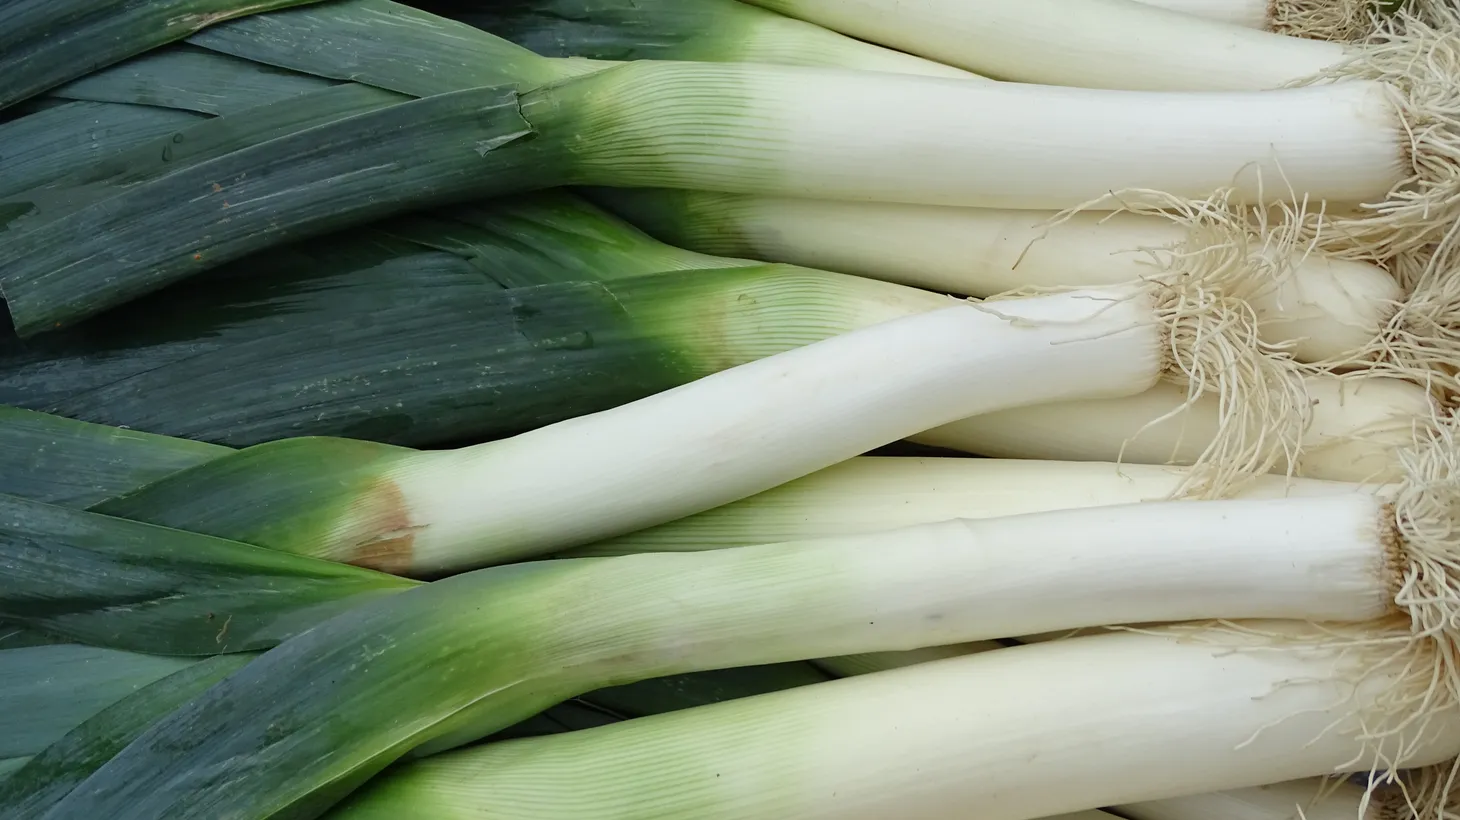 Leeks were revered by the Roman emperor Nero as well as Shakespeare in his play, "Henry IV."